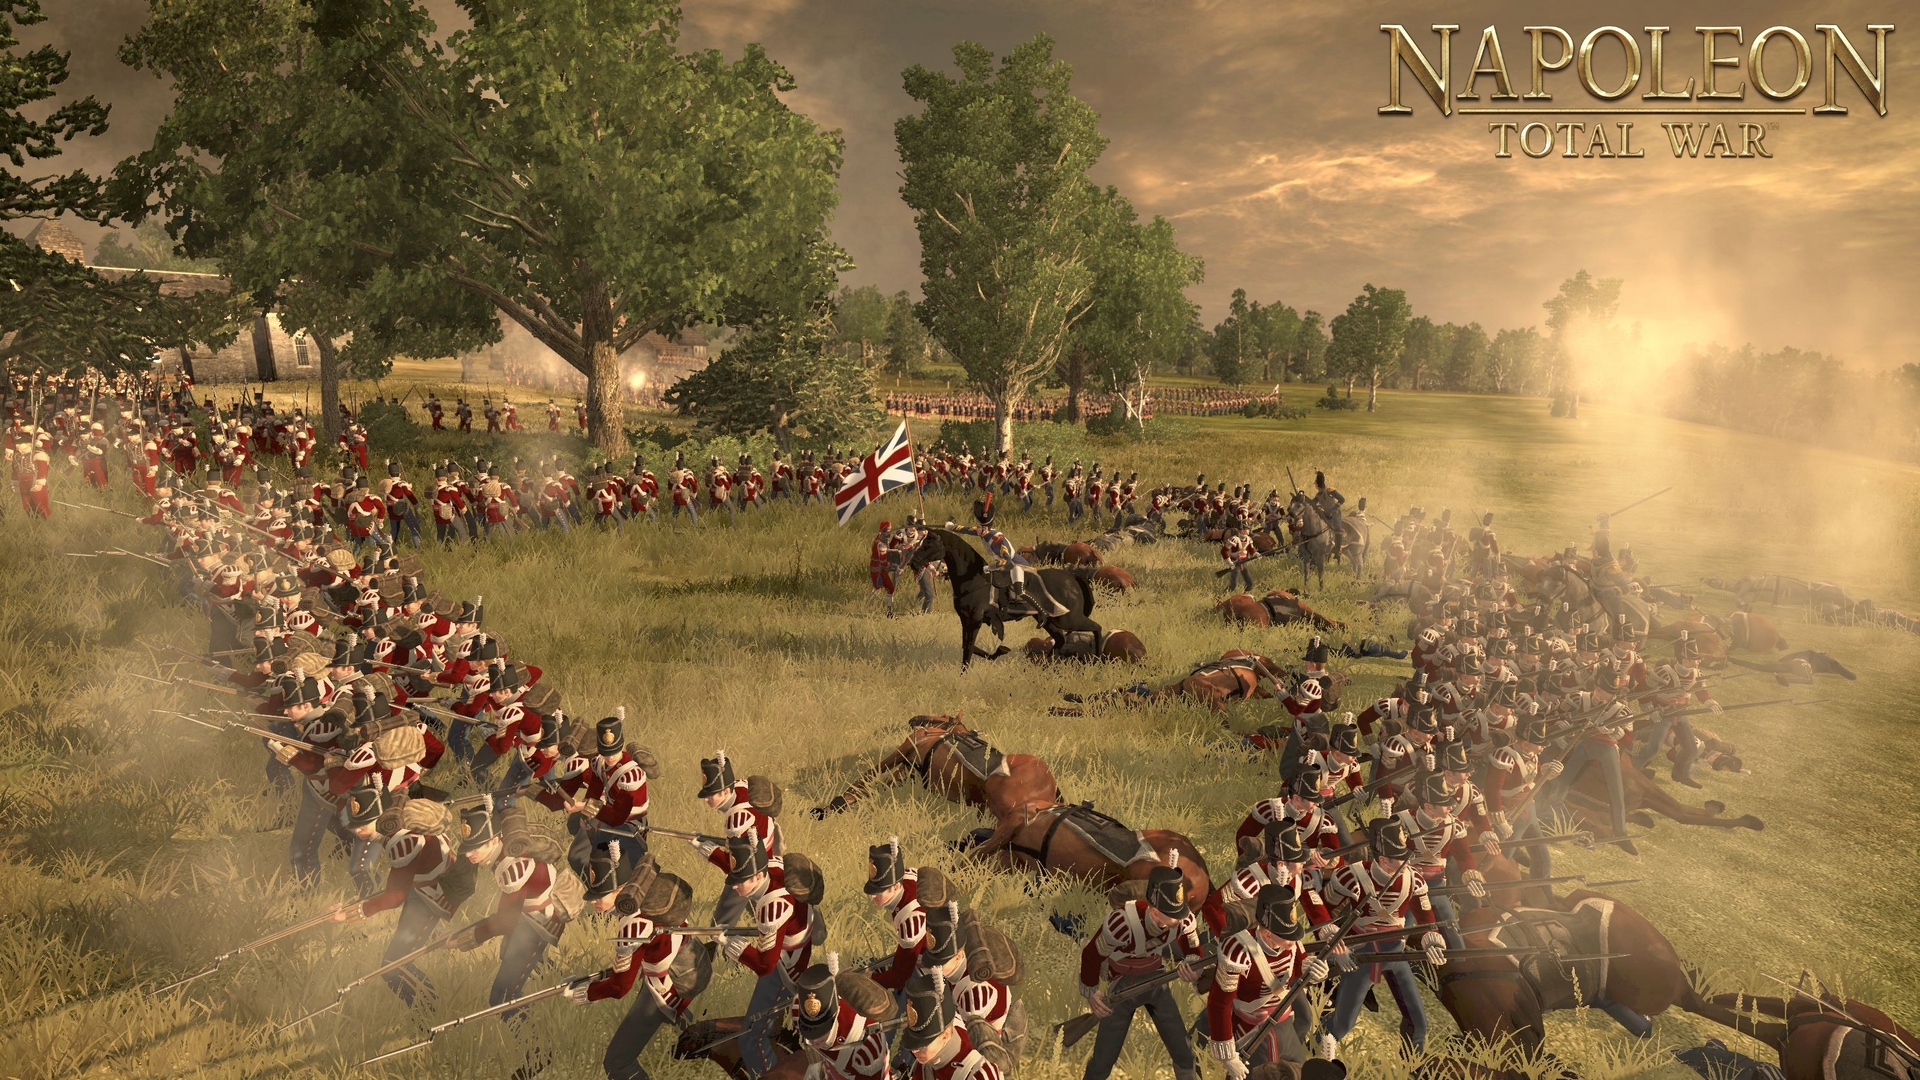 Save 75% on Total War: NAPOLEON – Definitive Edition on Steam